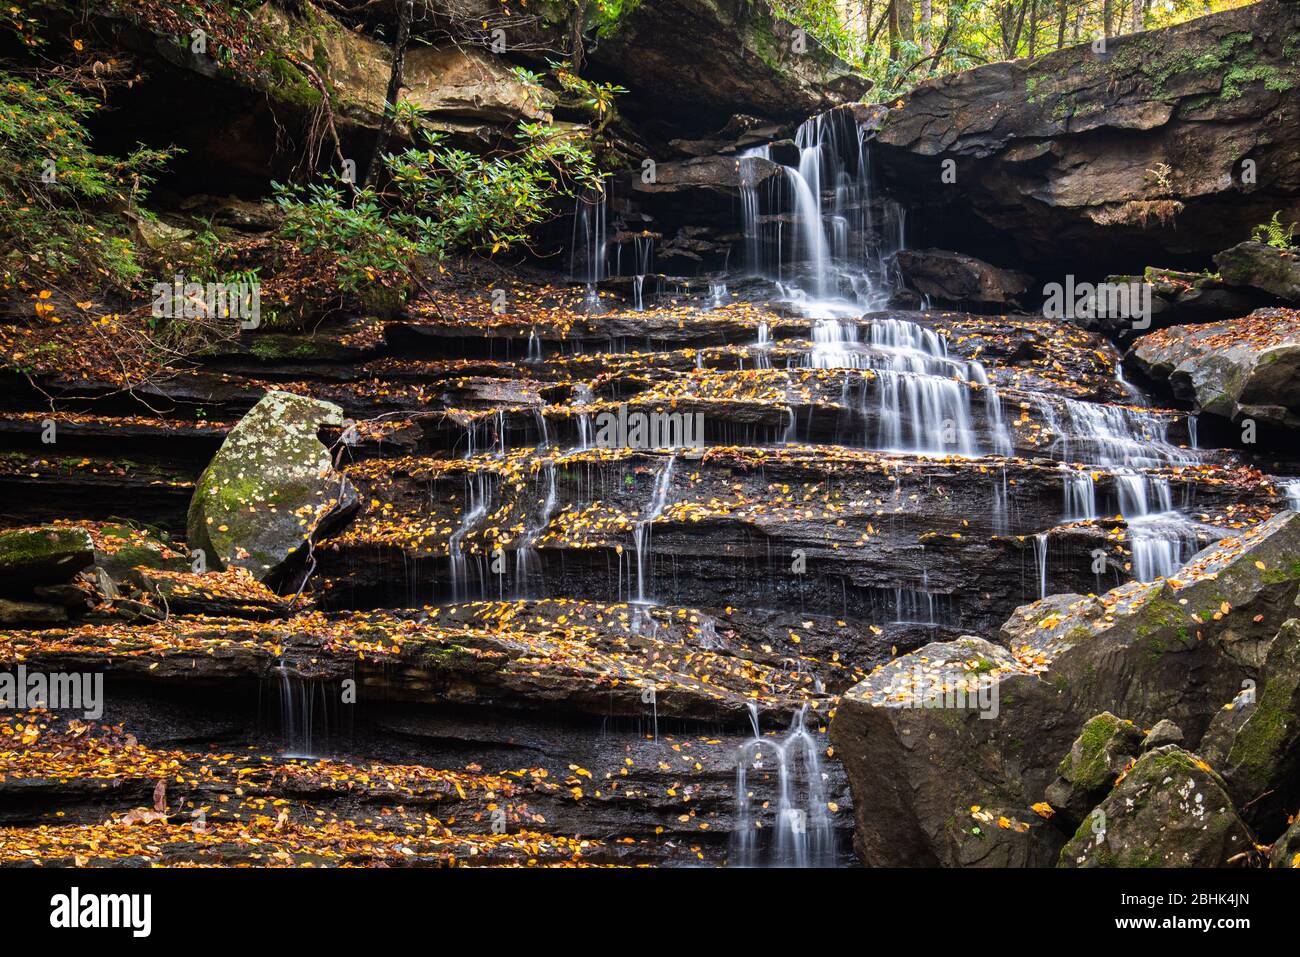 Water flows gently over the stair stepped rocks covered in colorful orange autumn foliage on Laurel Creek in West Virginia. Stock Photo